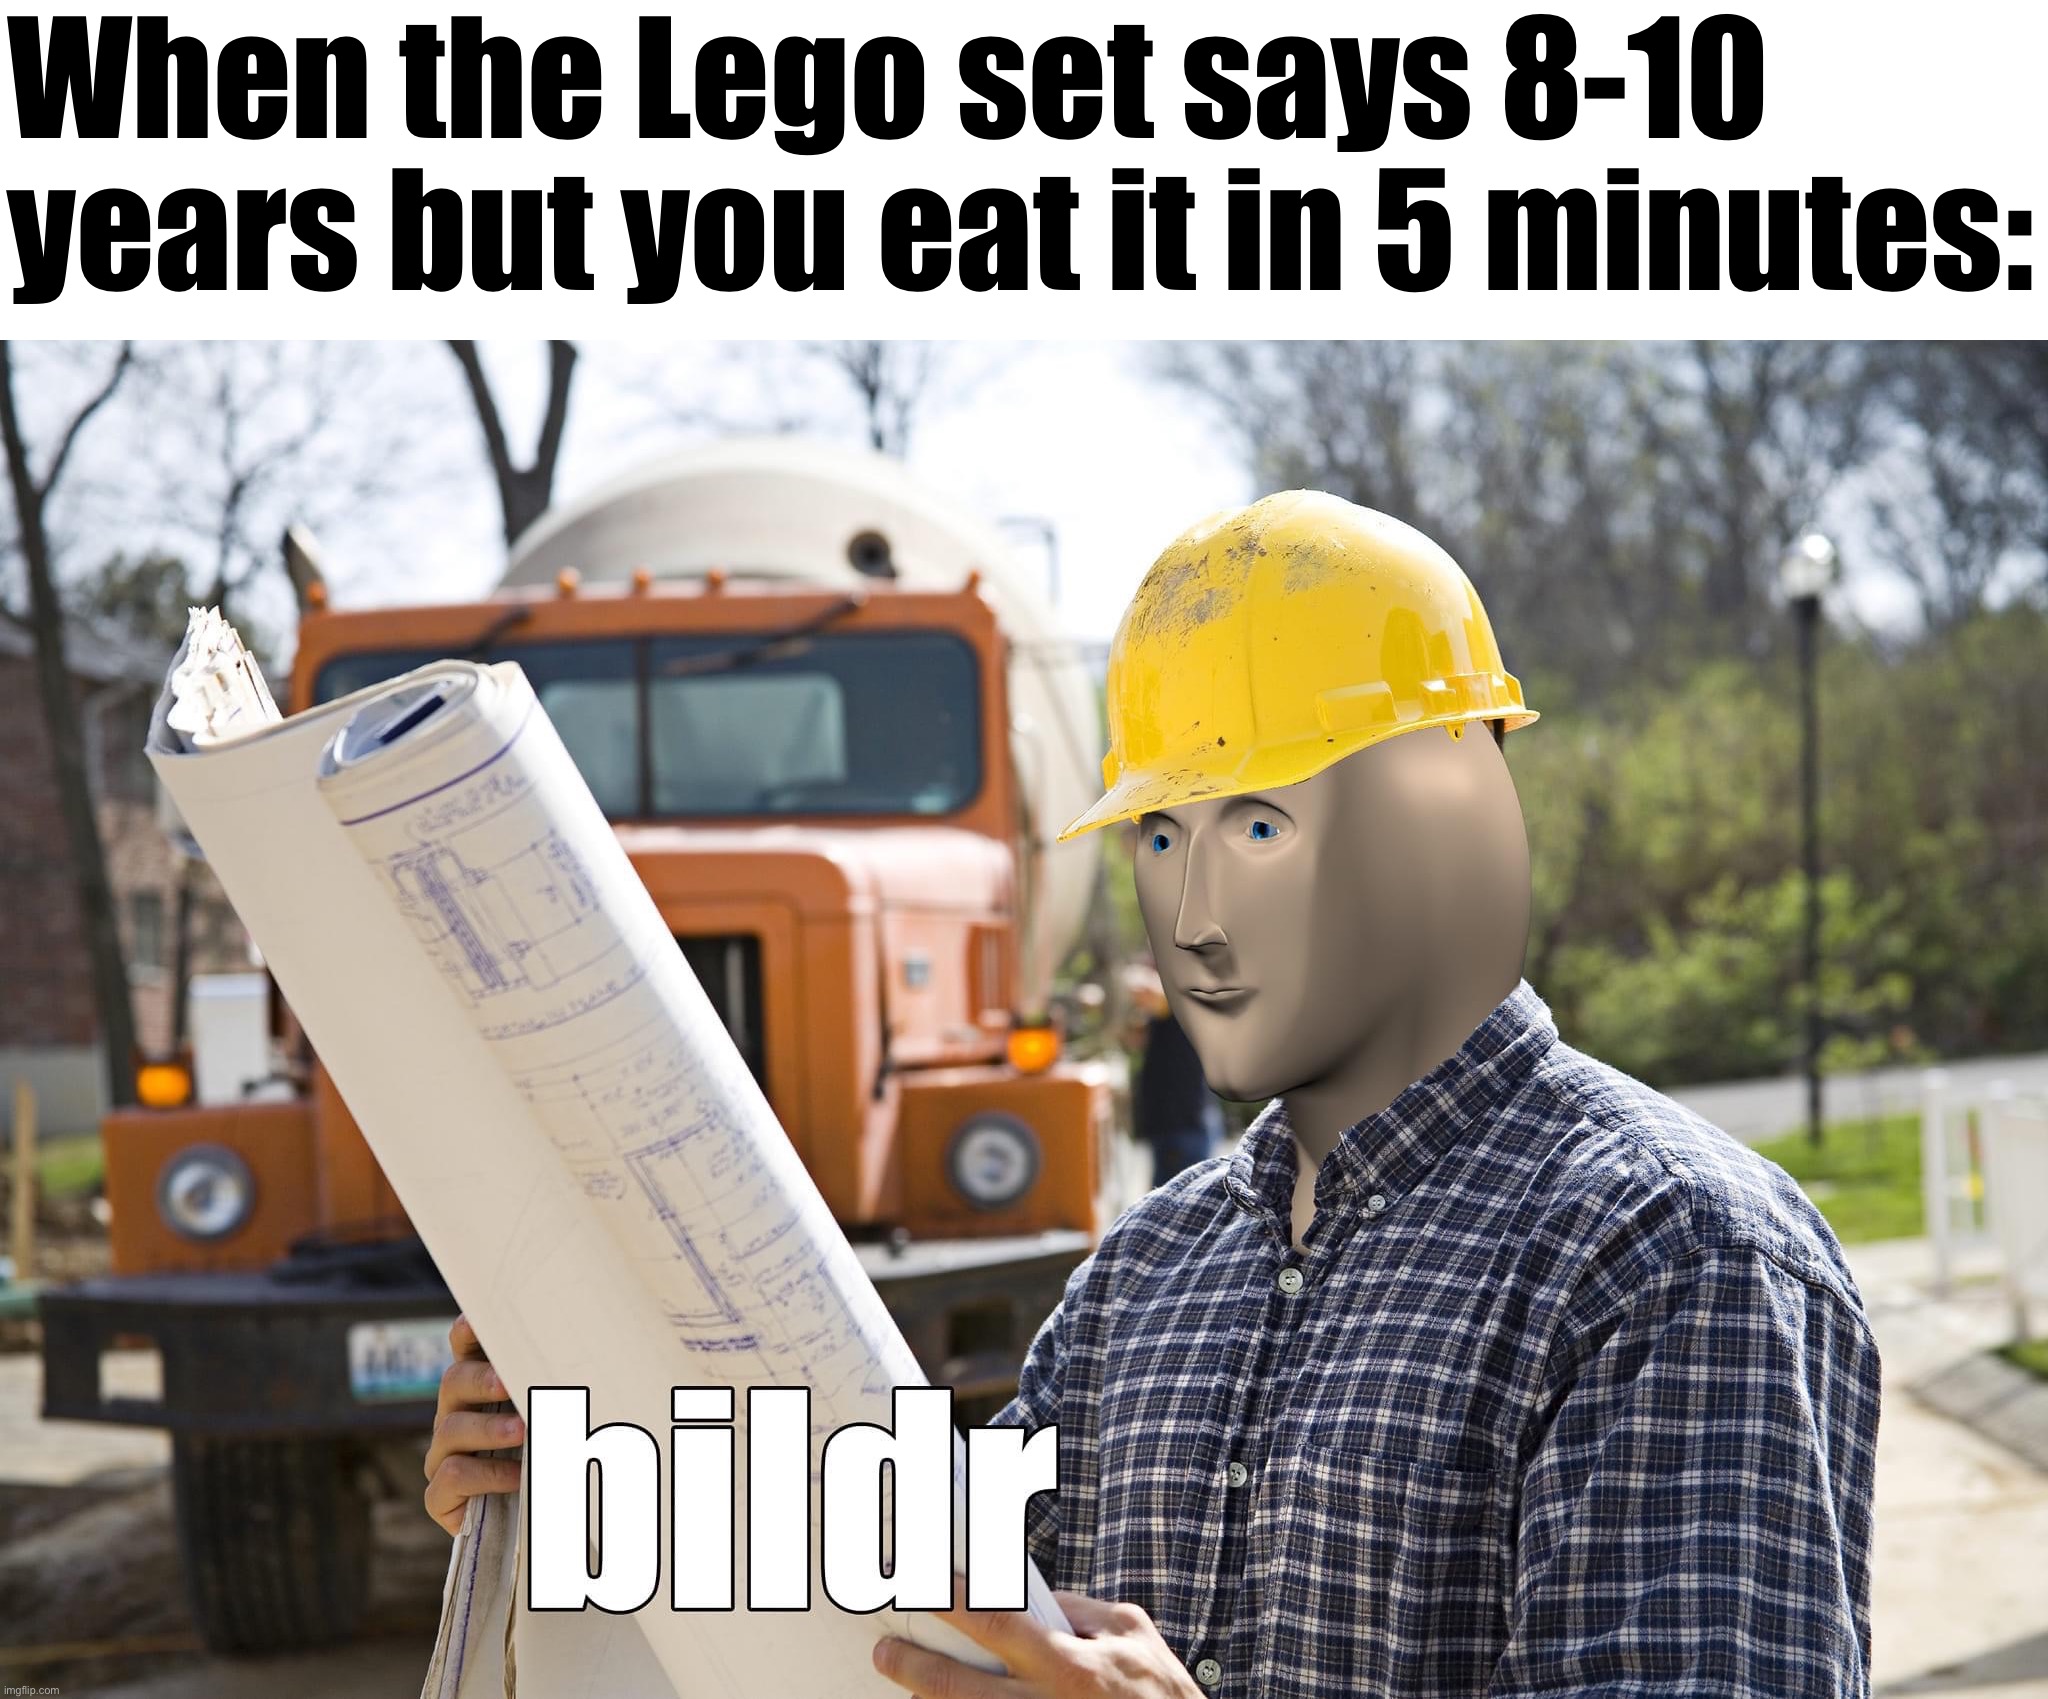 Meme man builder | When the Lego set says 8-10 years but you eat it in 5 minutes: | image tagged in meme man builder | made w/ Imgflip meme maker